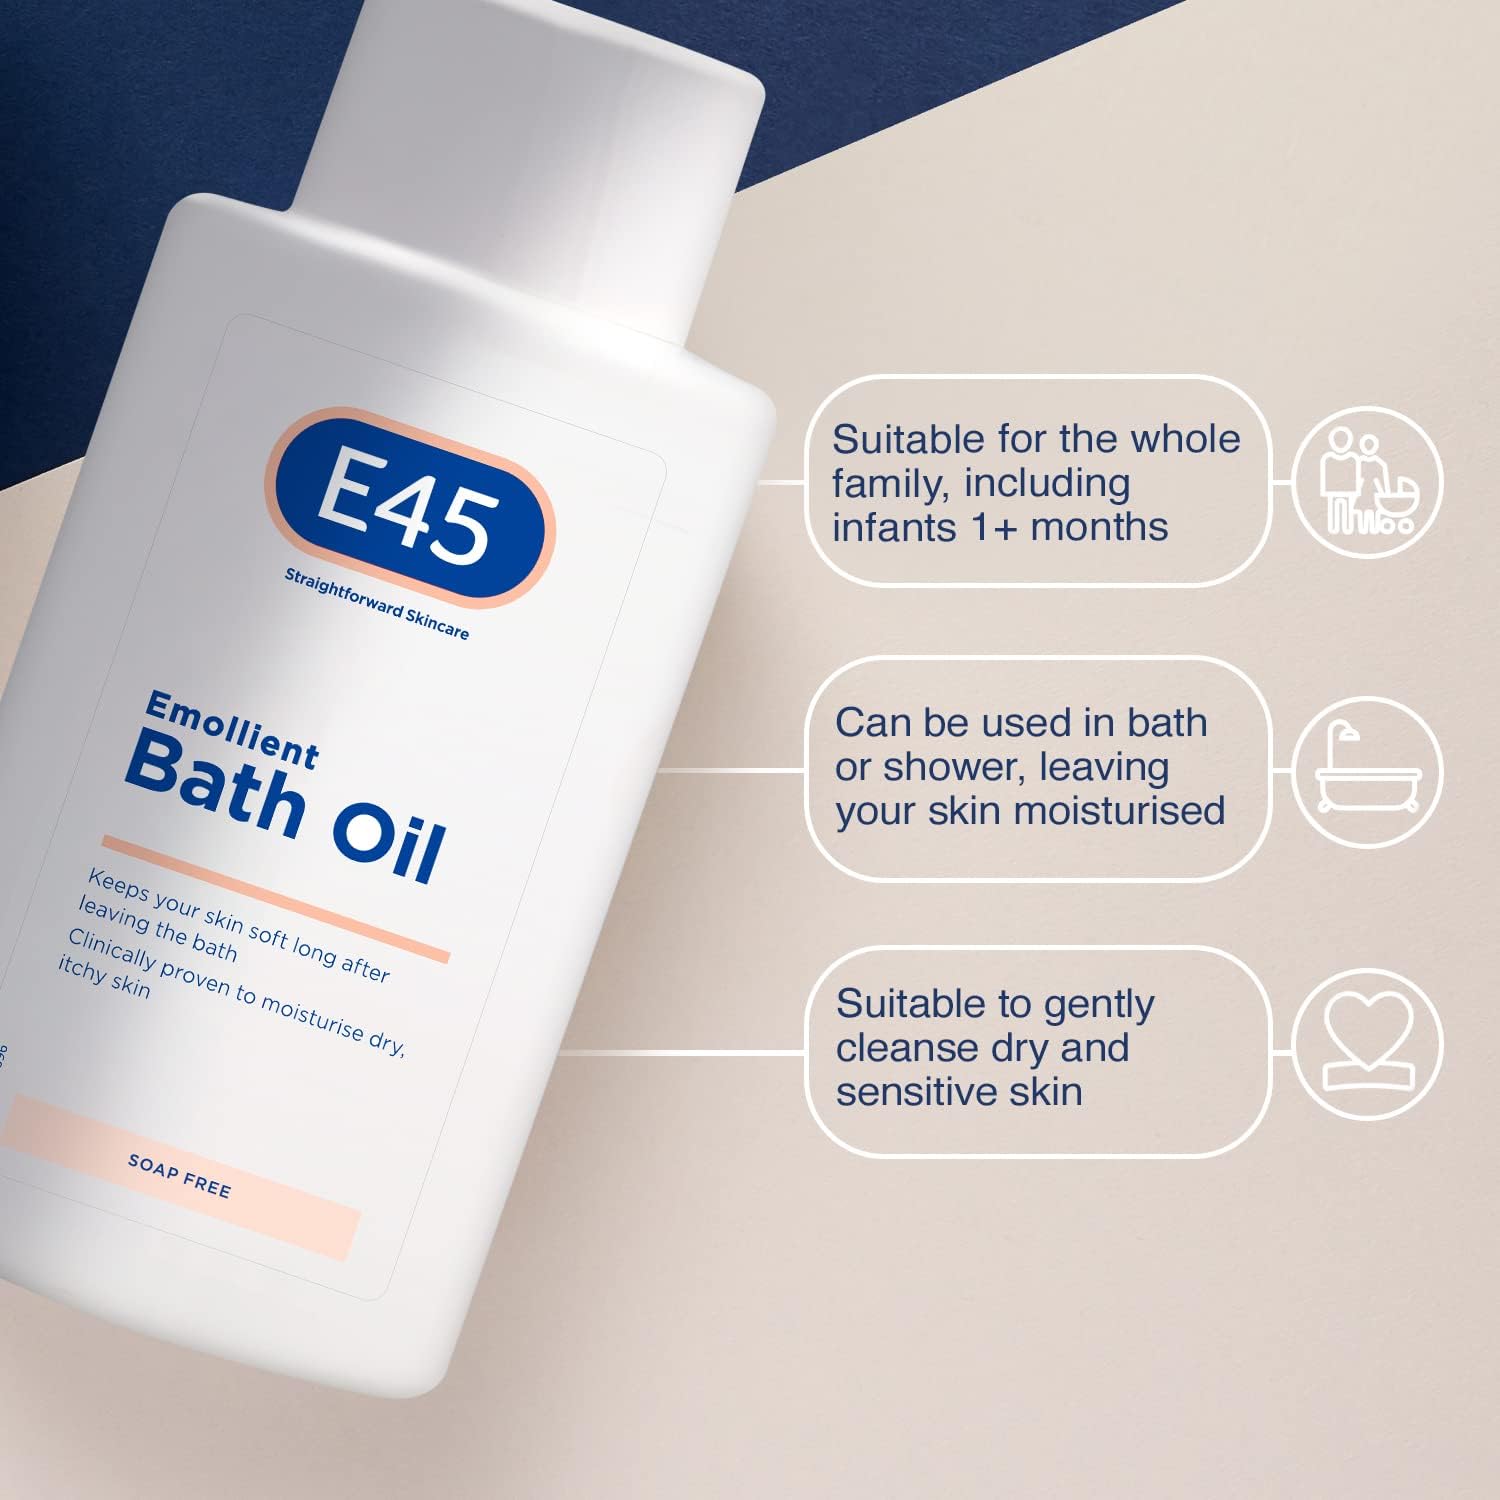 E45 Bath Oil 500 ml – E45 Bath Oil Emollient to Moisturise & Hydrate Dry Skin – Gently Cleanses for Soft Skin – Soap Free & Perfume Free Emollient Bath & Shower Oil Body Wash - Dermatologically Tested : Amazon.co.uk: Grocery